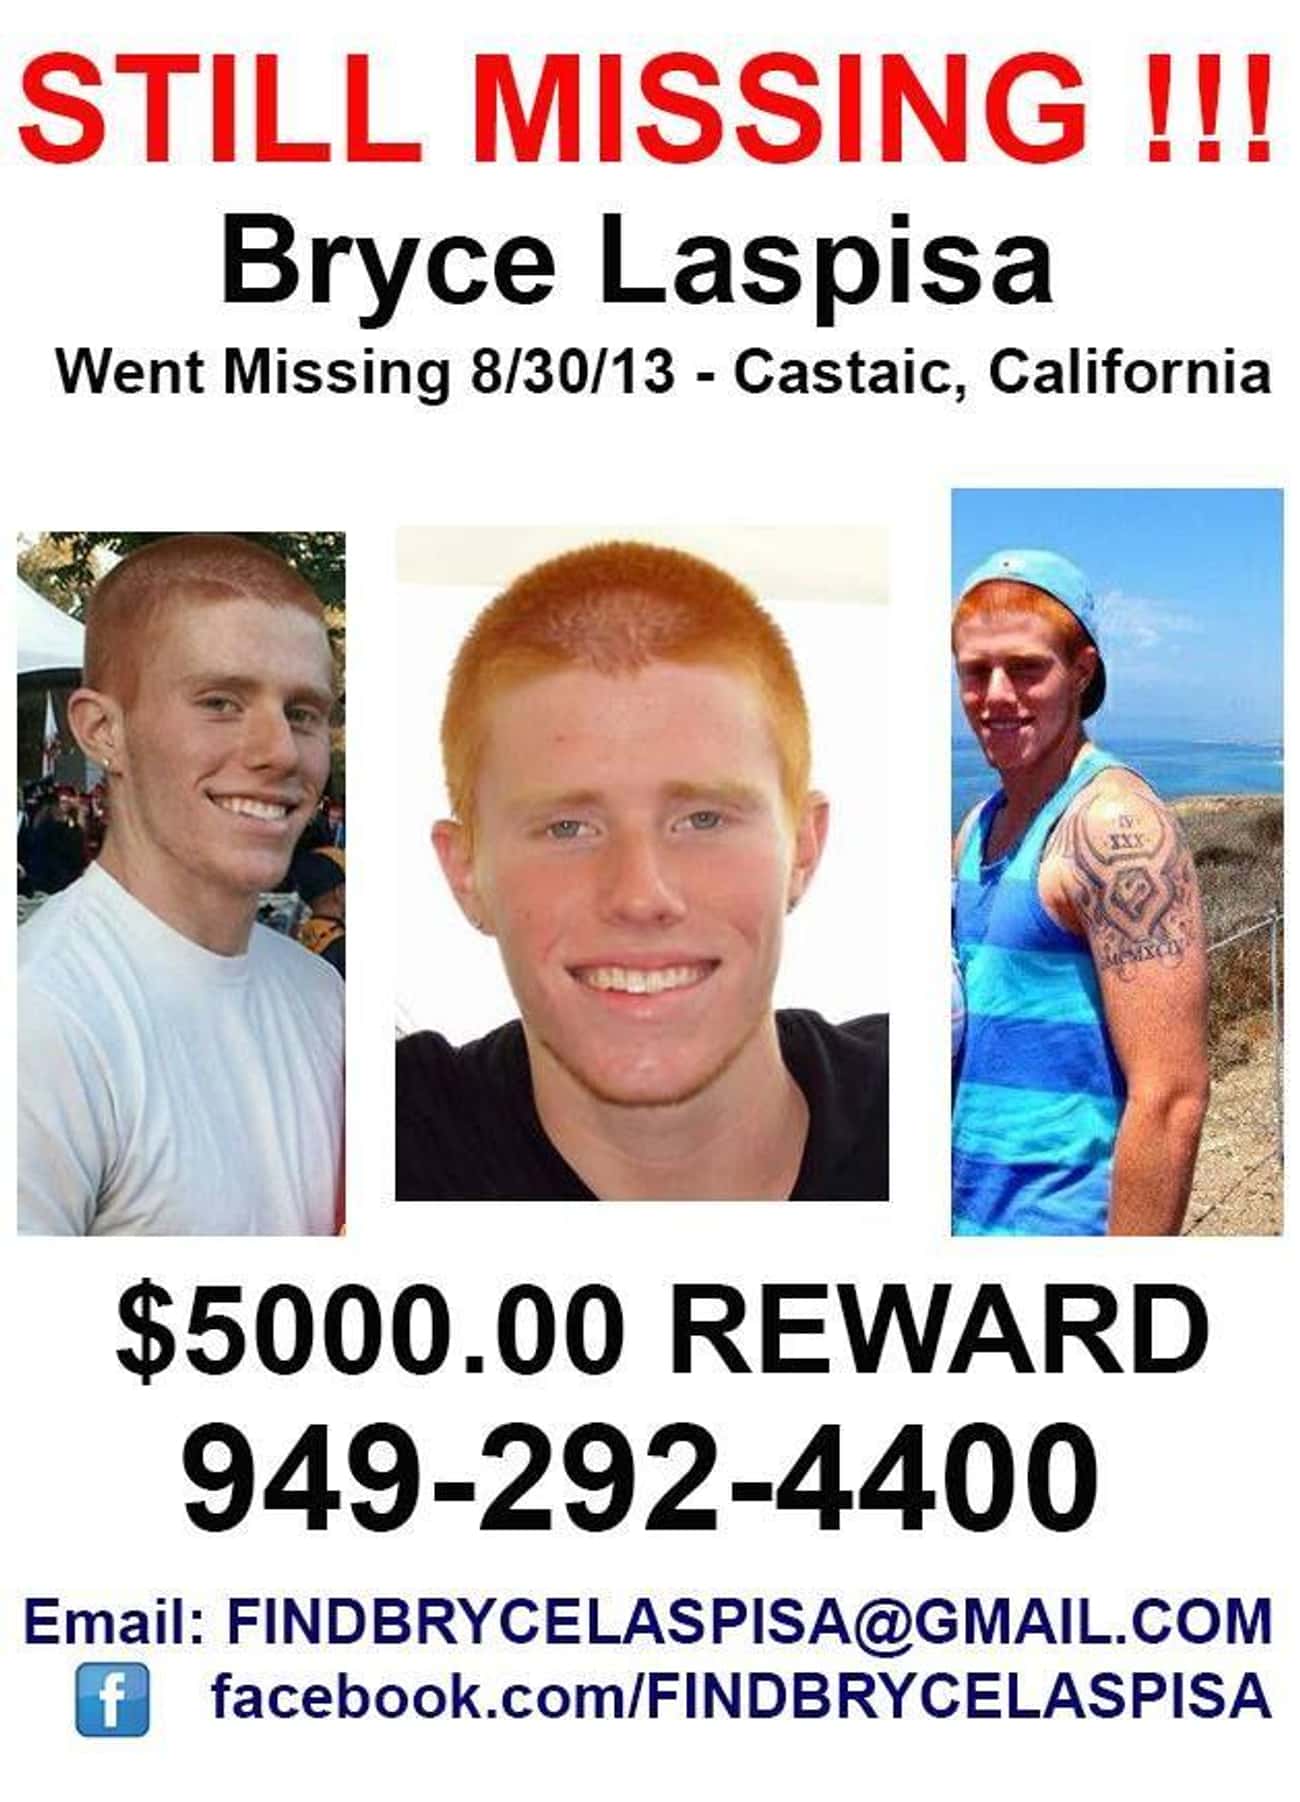 On August 28, 2013, College Student Bryce Laspisa Told His Mother He Had 'A Lot To Talk To Her About' And Began Driving Home 